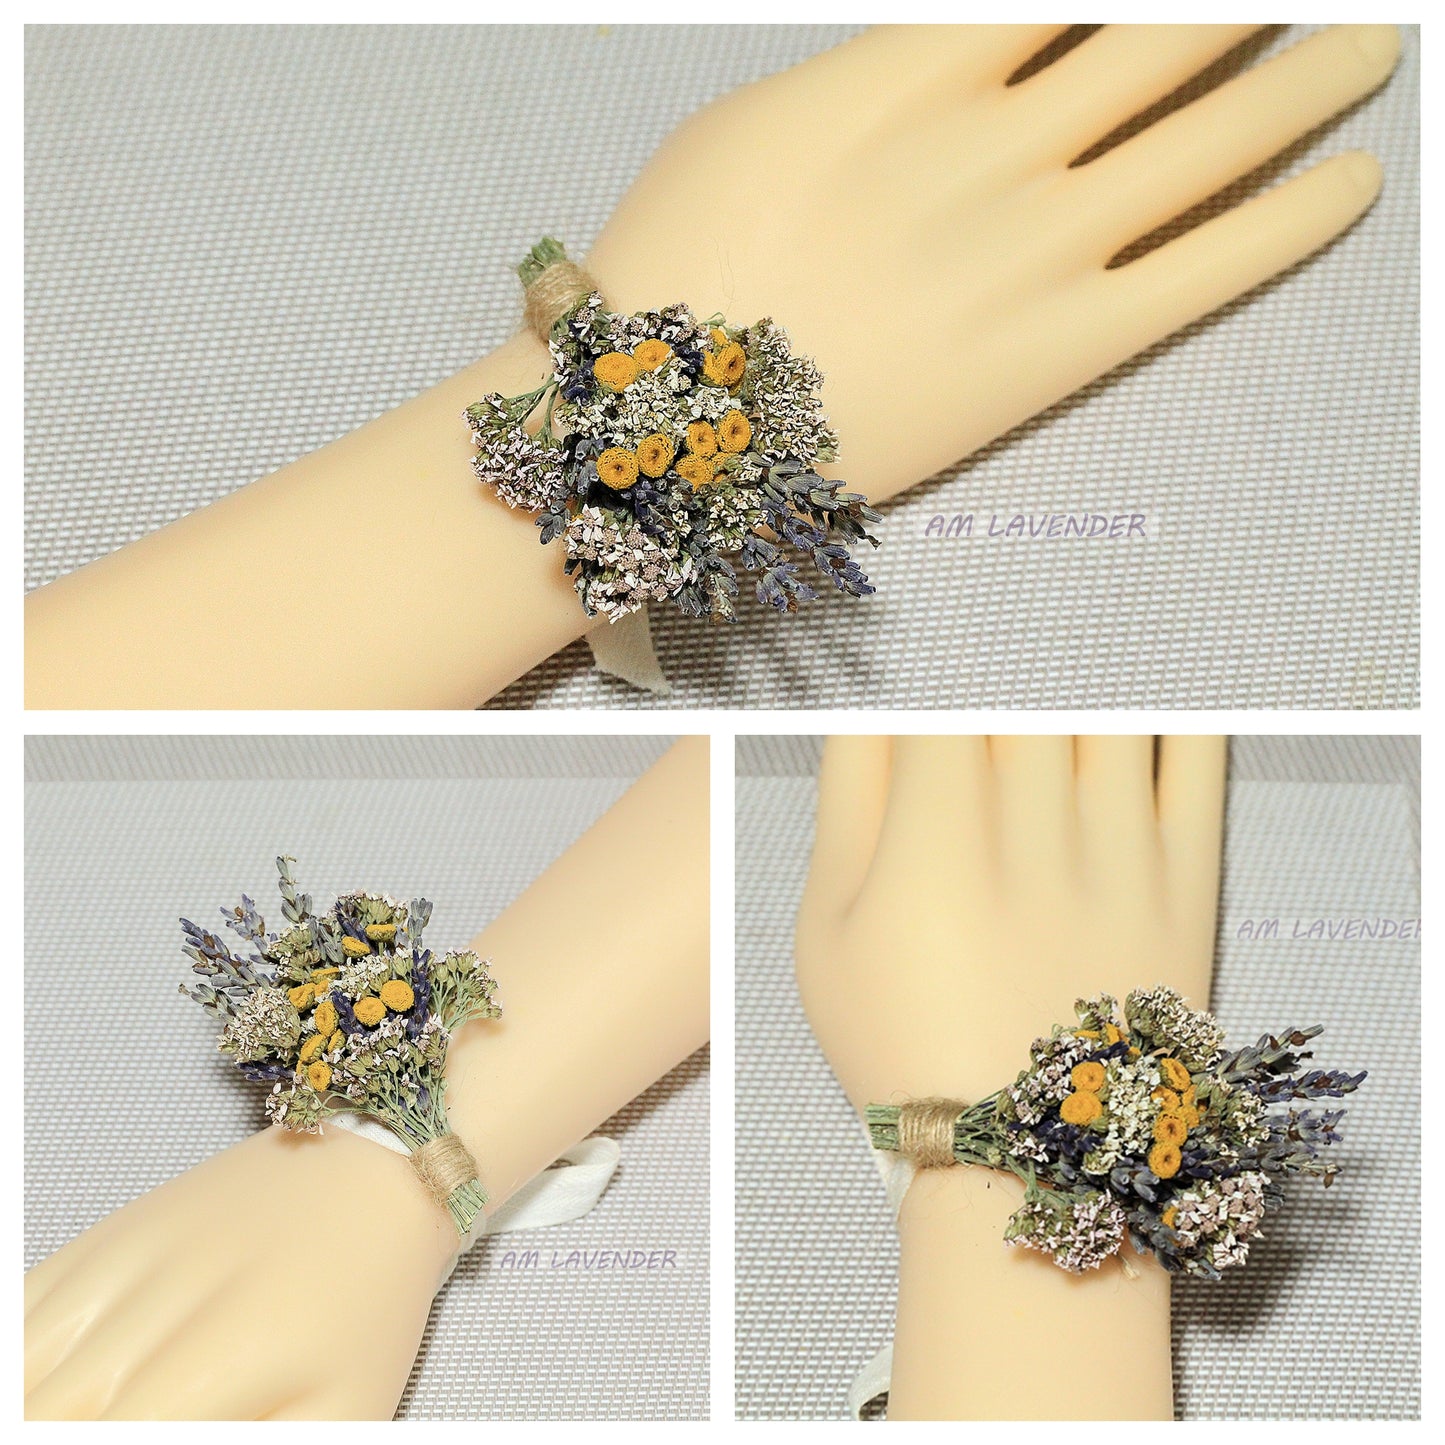 Boutonniere / Corsage : Starry Night | AM Lavender